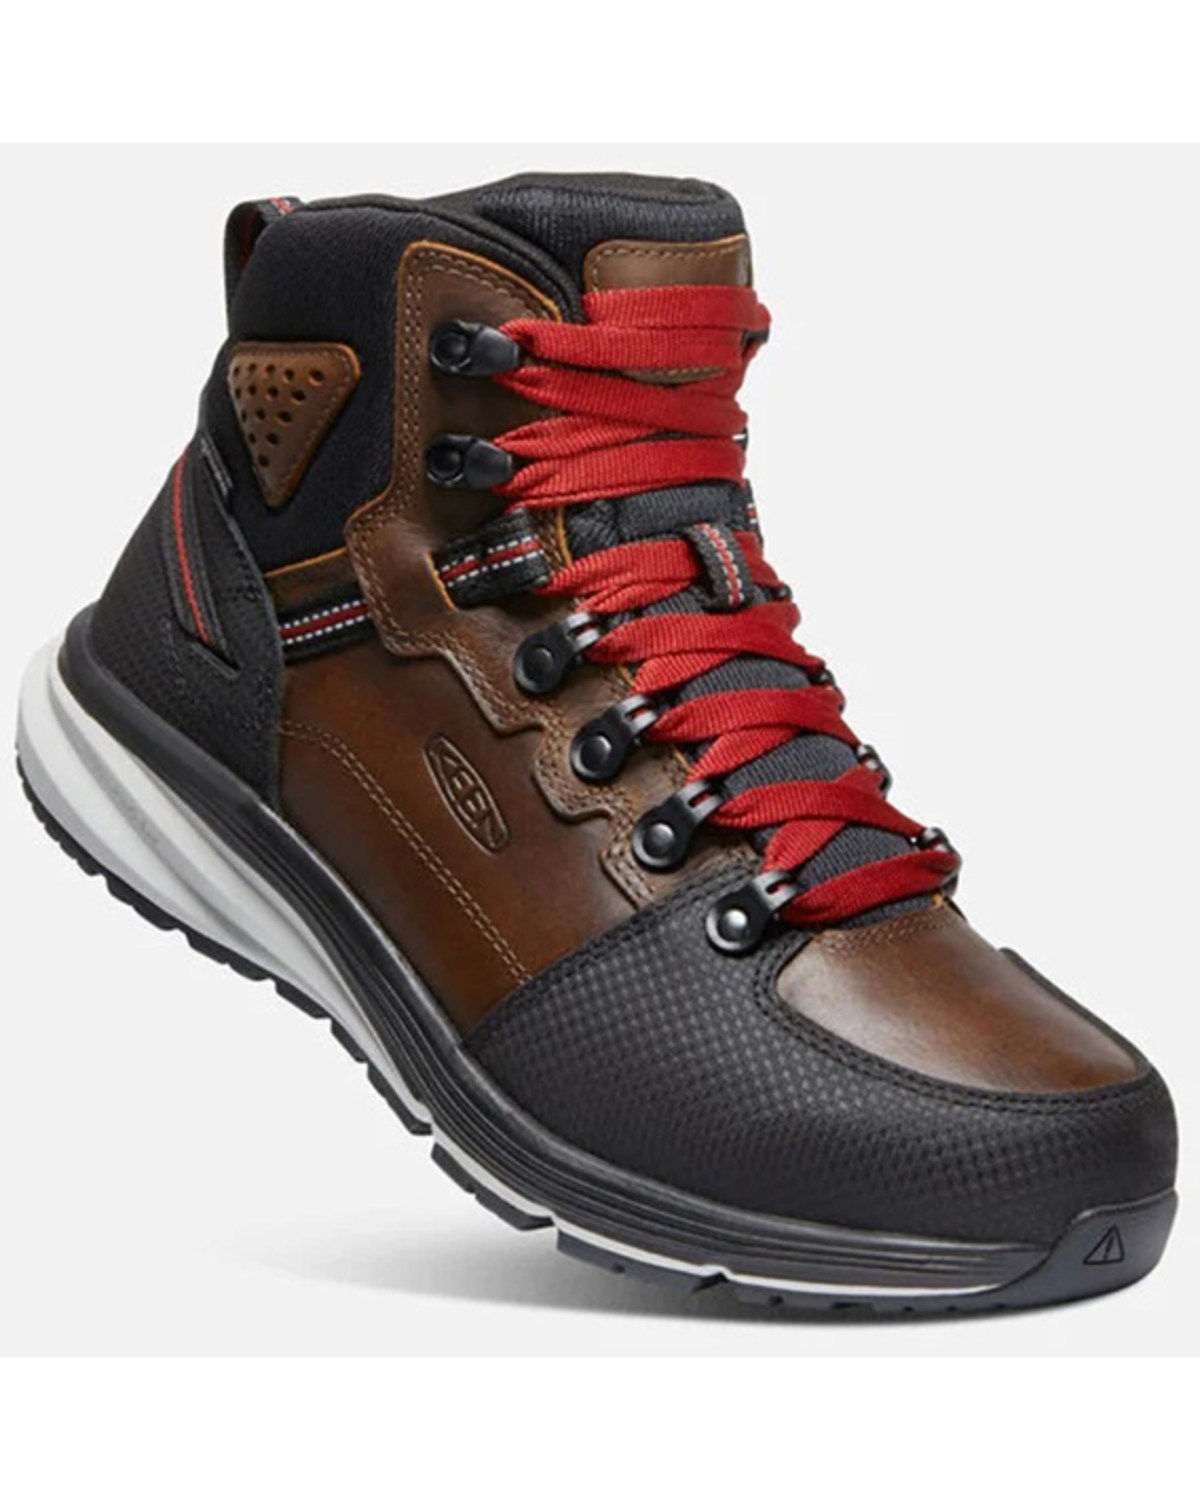 Keen Men's Red Hook Lace-Up Waterproof Work Boots - Soft Toe